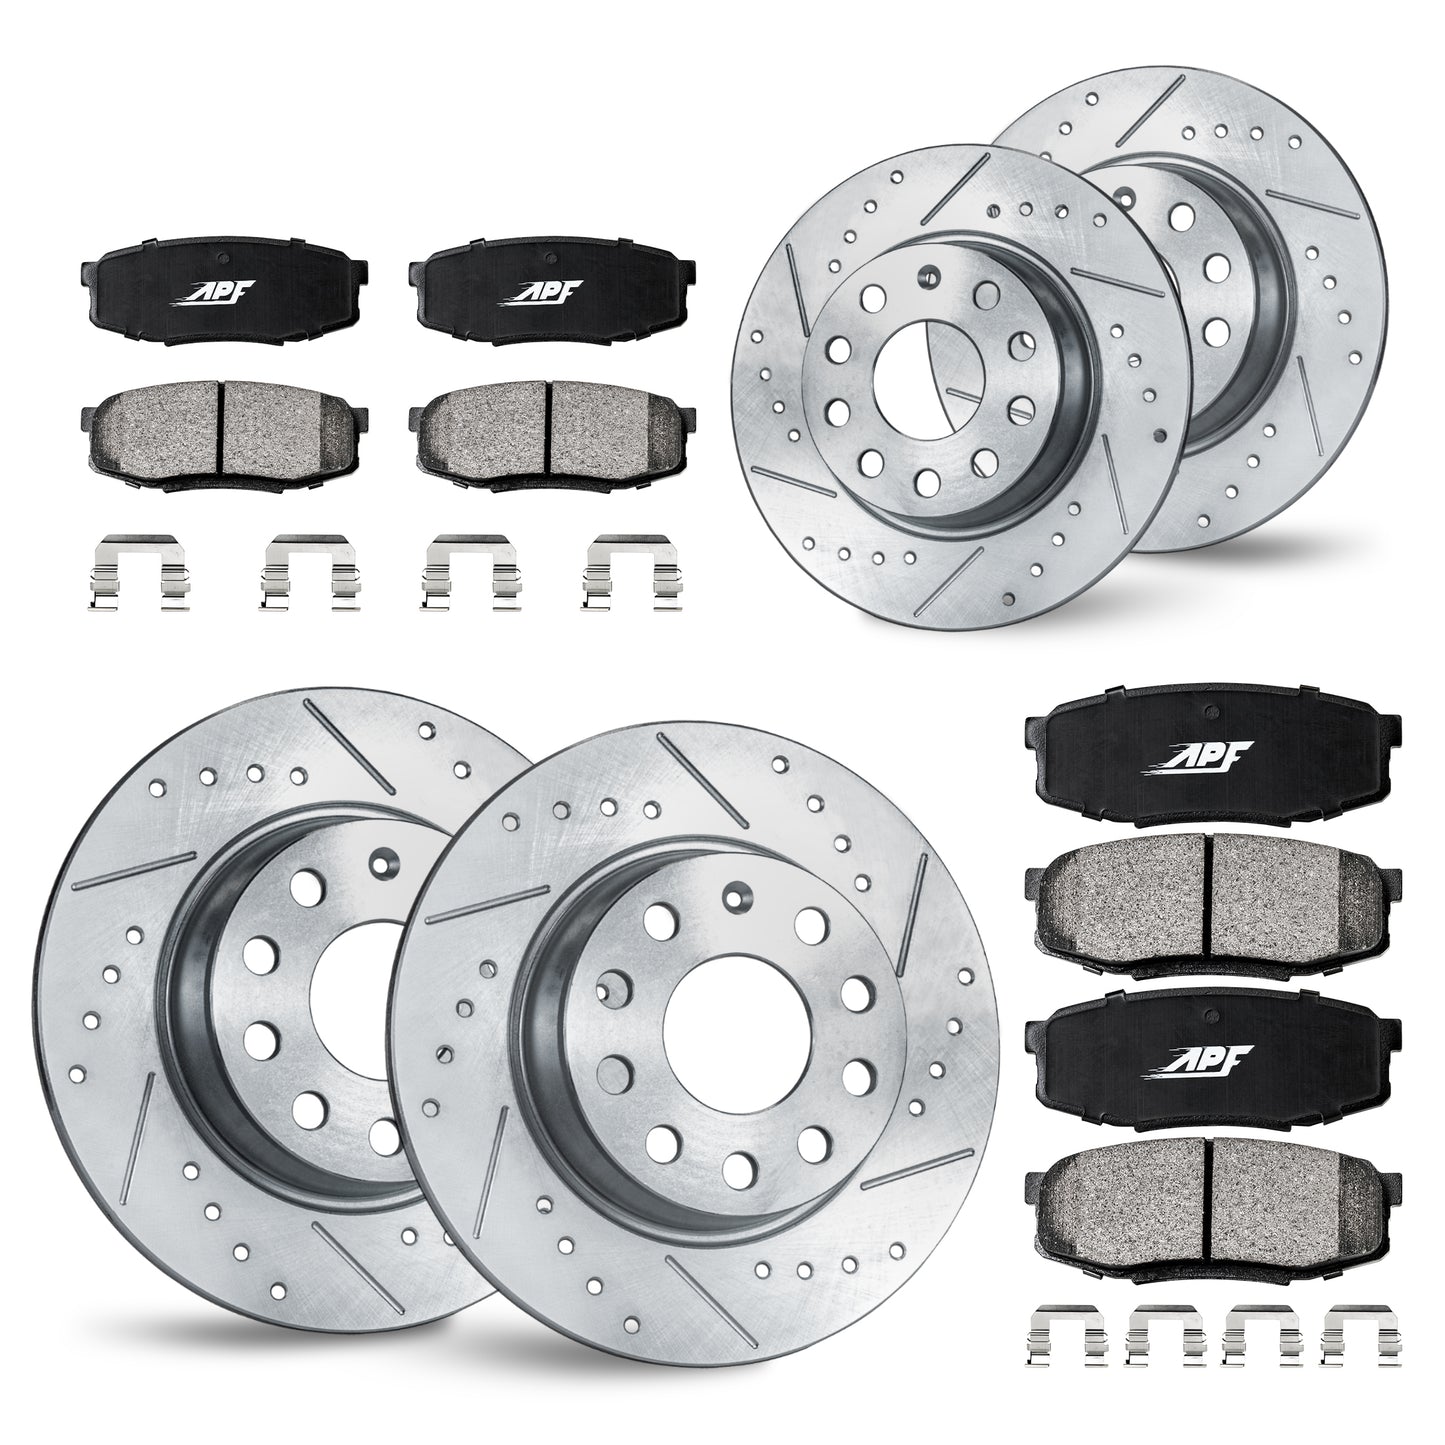 APF Full Kit compatible with Volkswagen Beetle 2012 | Zinc Drilled Slotted Rotors with Ceramic Carbon Fiber Brake Pads